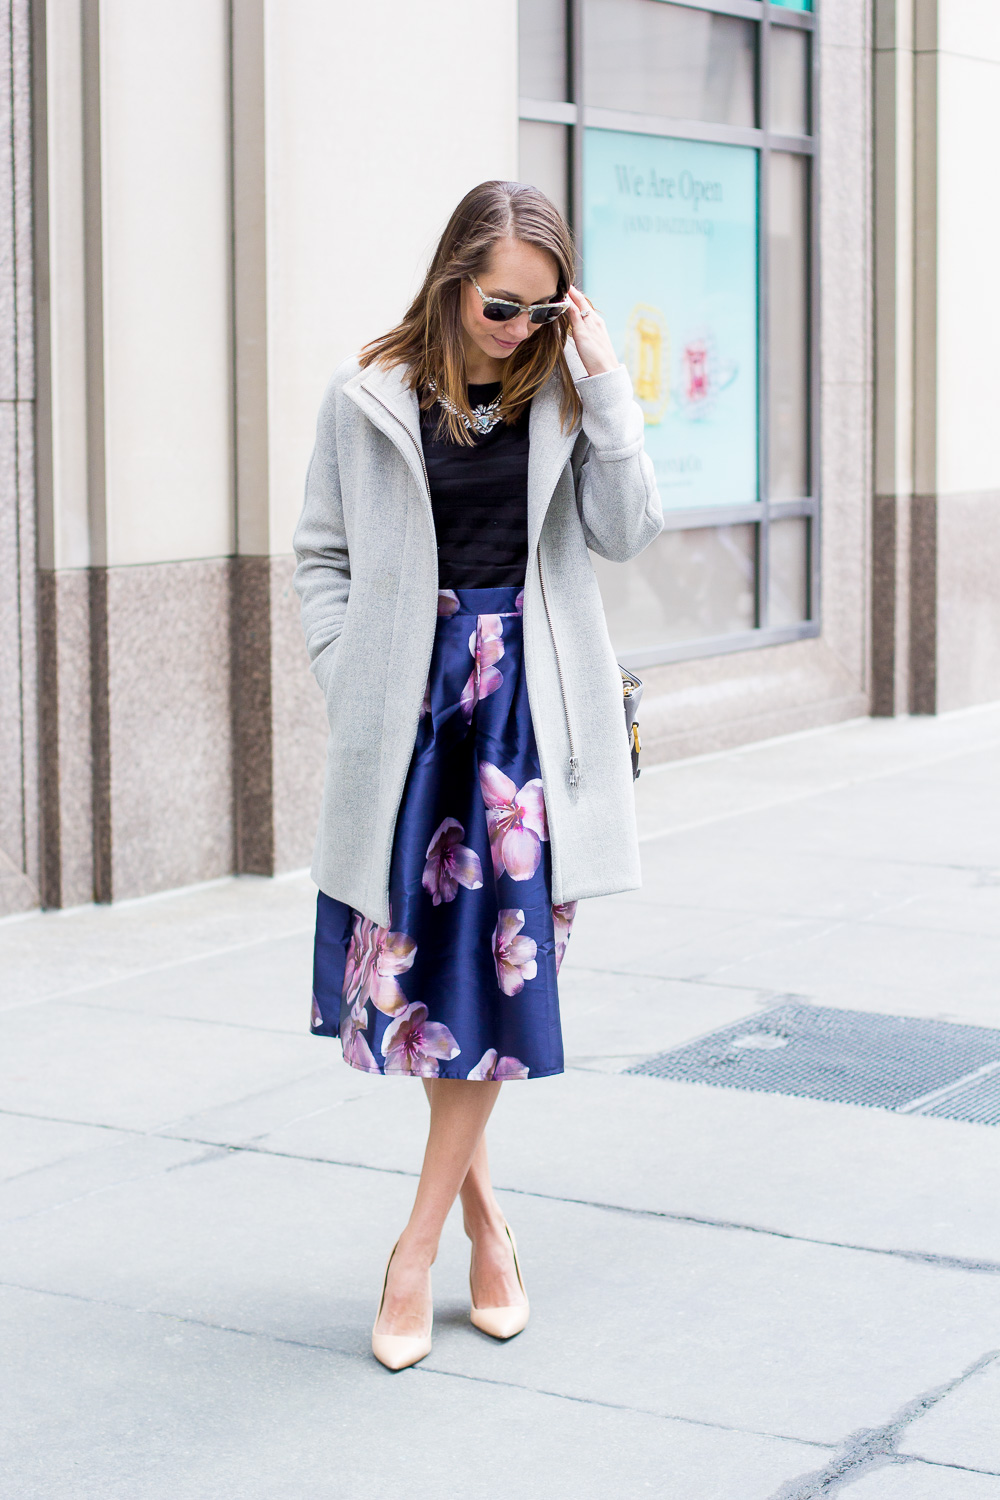 Floral Midi Skirt for a Brunch with Veuve — The Fox & She